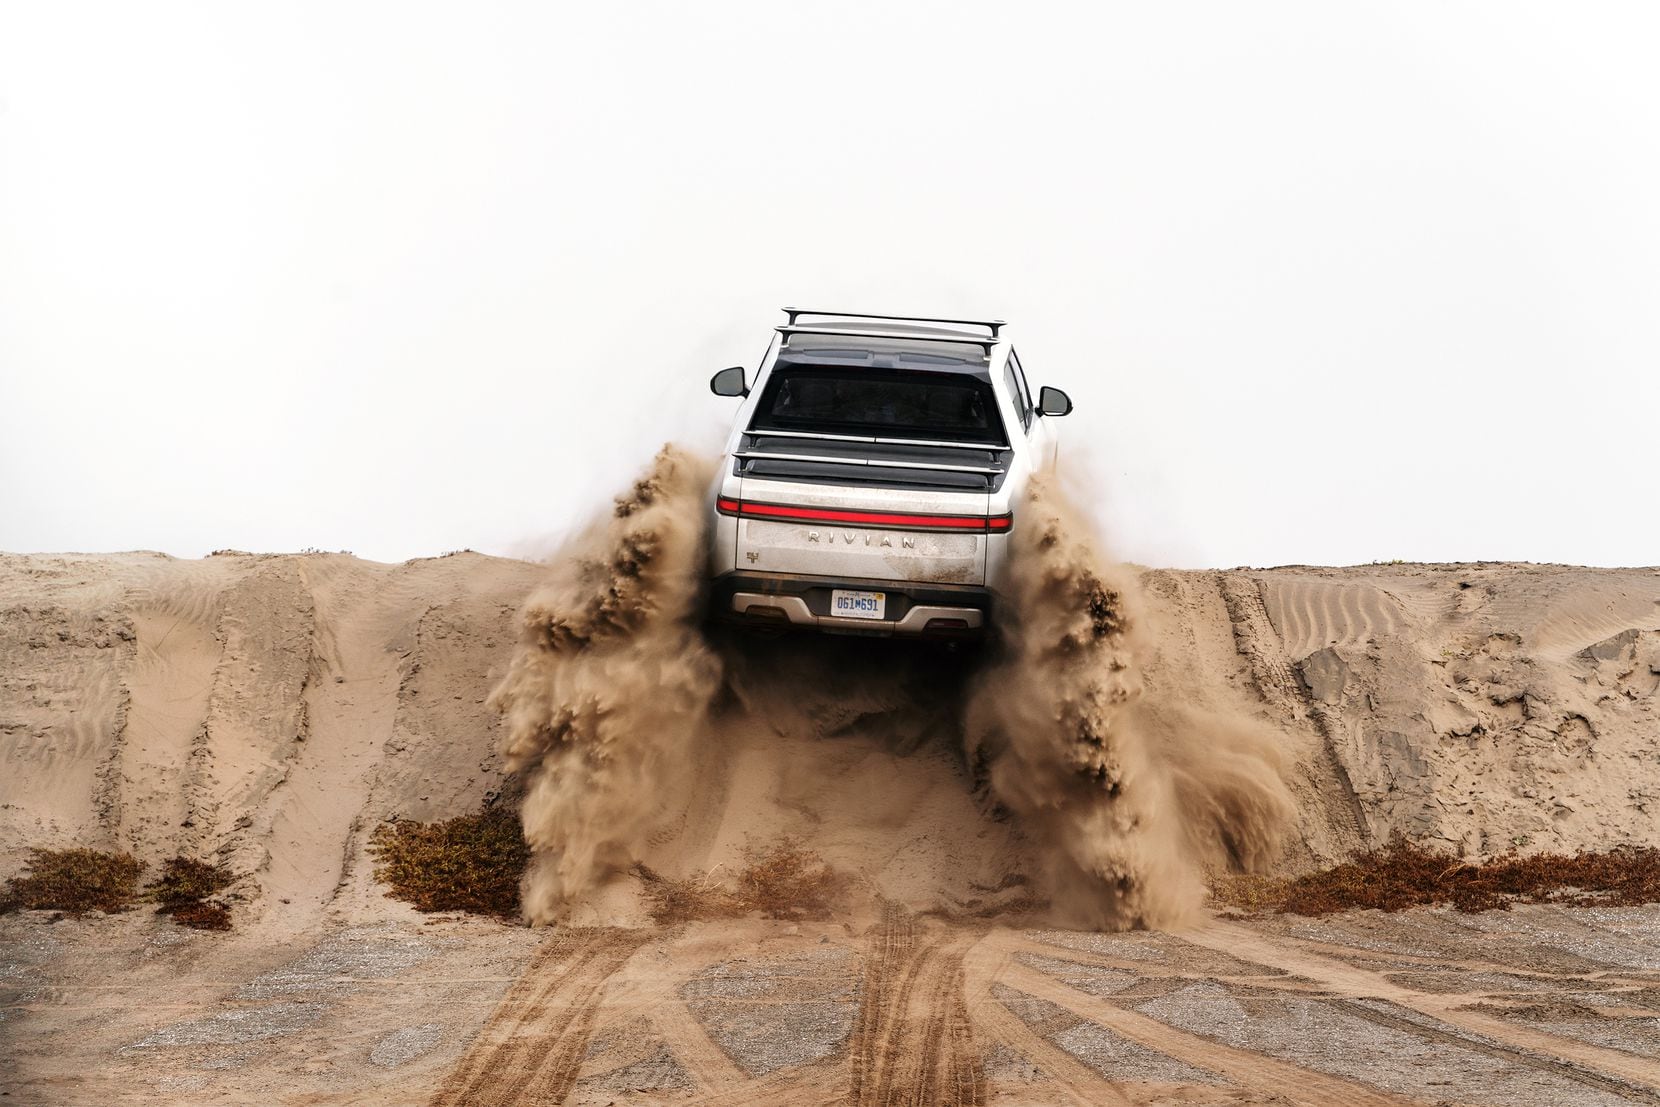 The Rivian R1T is ready to challenge luxury vehicles like Land Rovers.